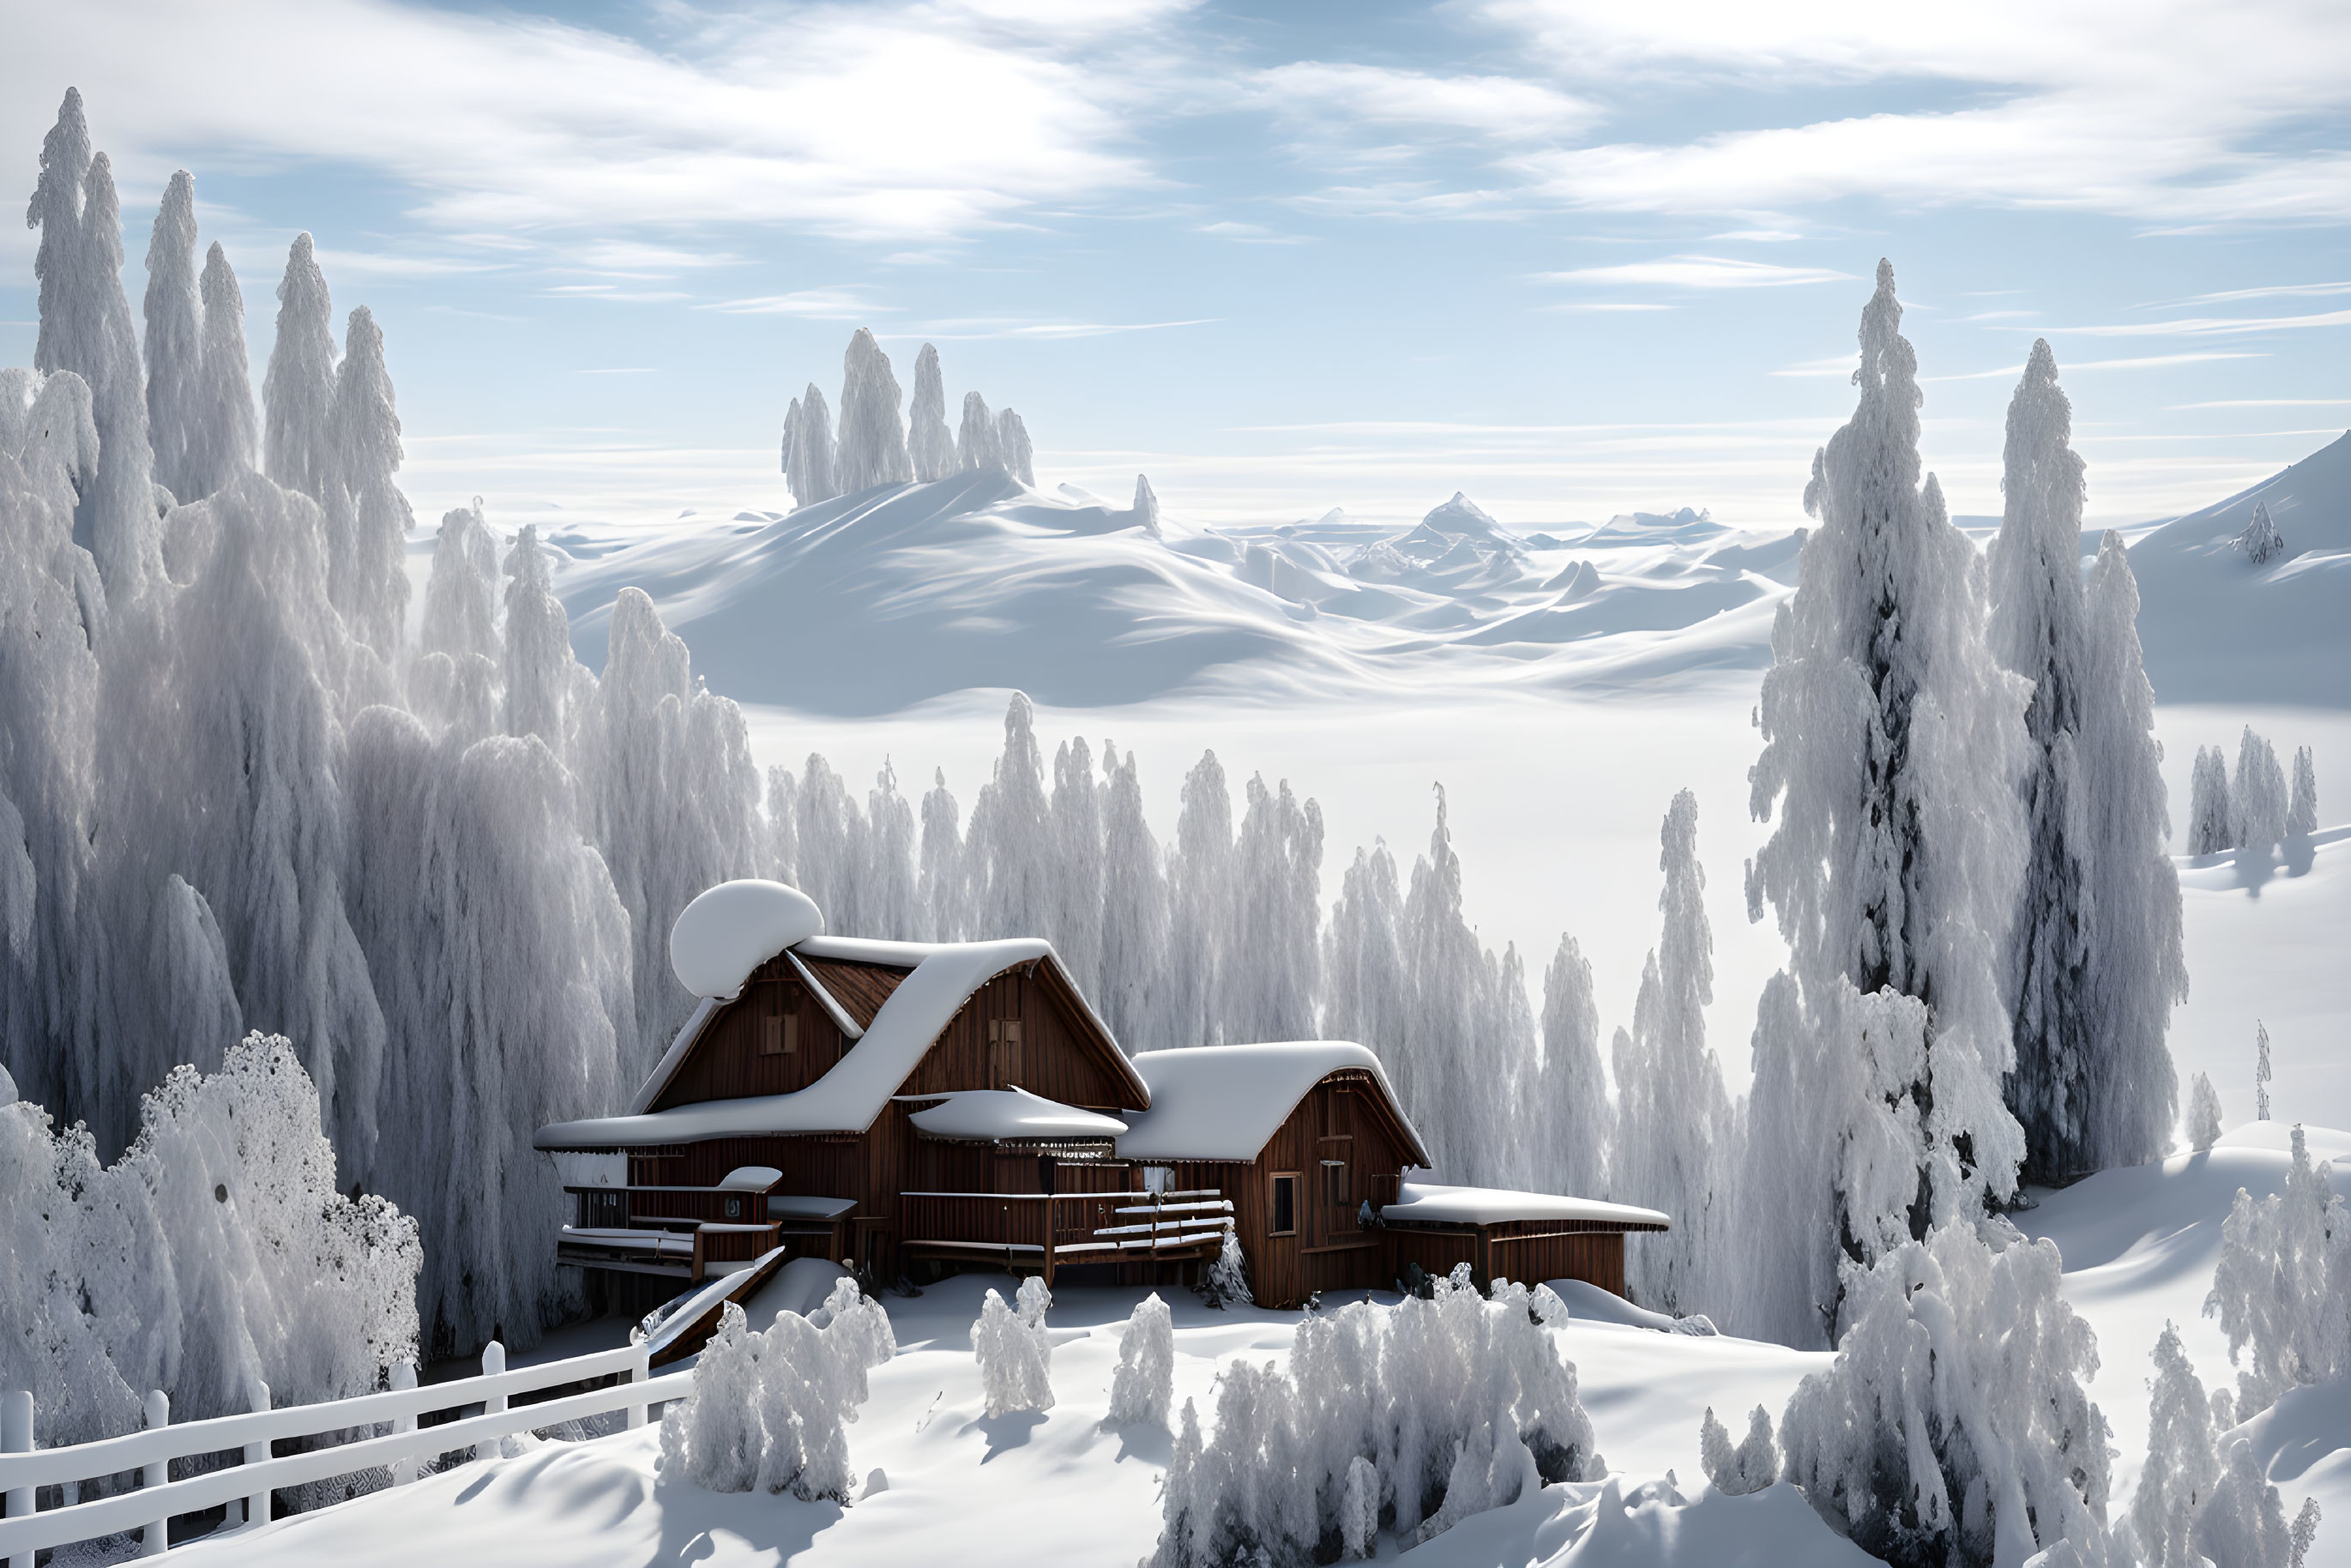 Winter scene: Snow-covered cabins, pine trees, and mountains in the snow.